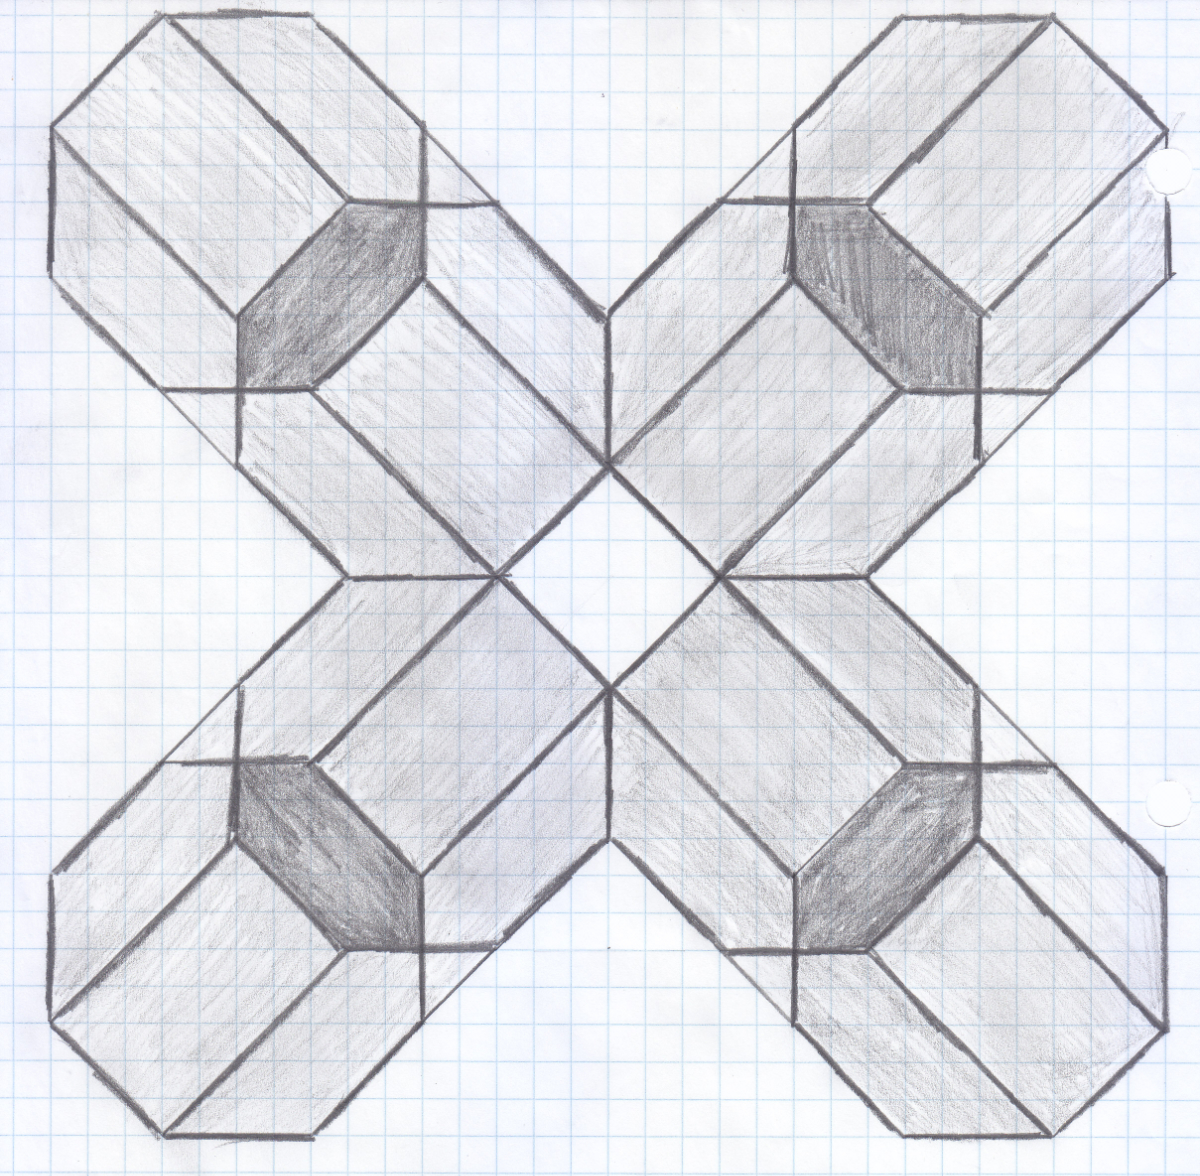 three-dimensional octagonal tube kinds of shapes protruding in all diagonal directions from a middle diamond shape